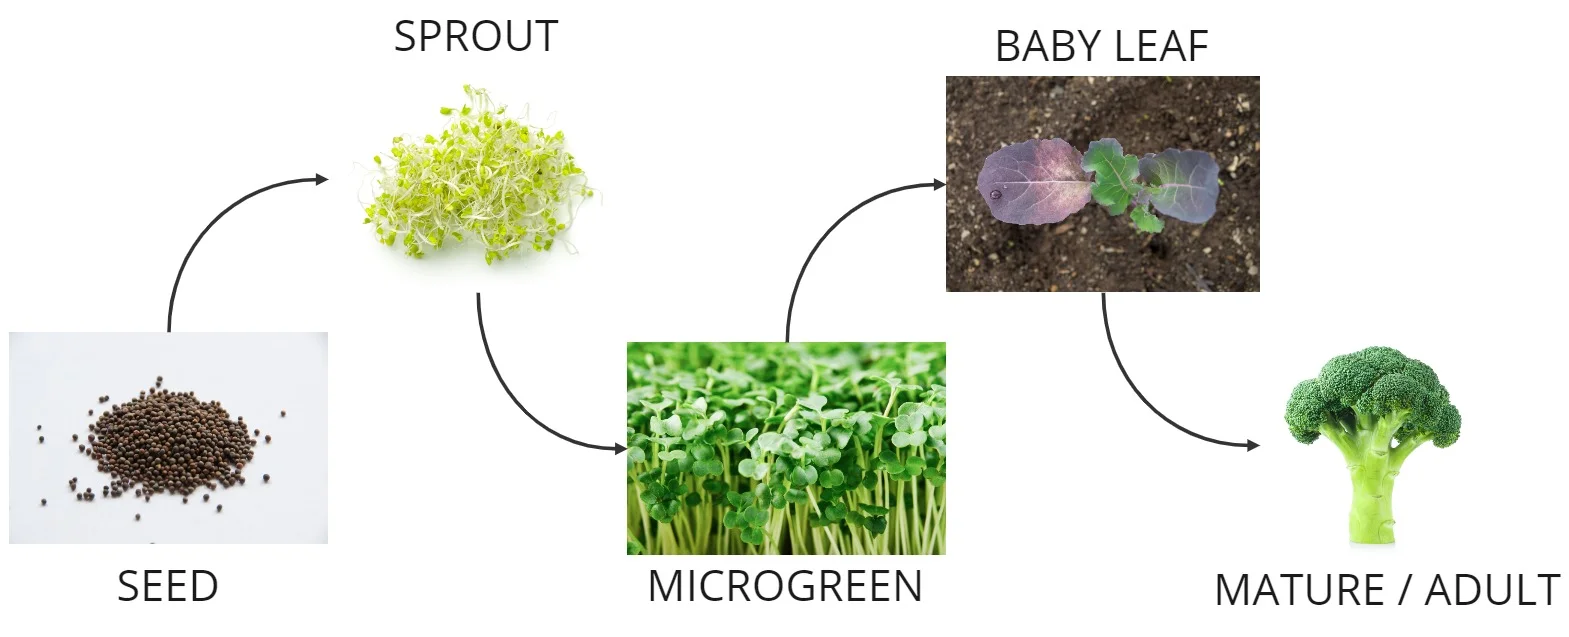 dPcMPcAL 3RAcr1vE broccoli stages Frame 1 2 | Natural Yield